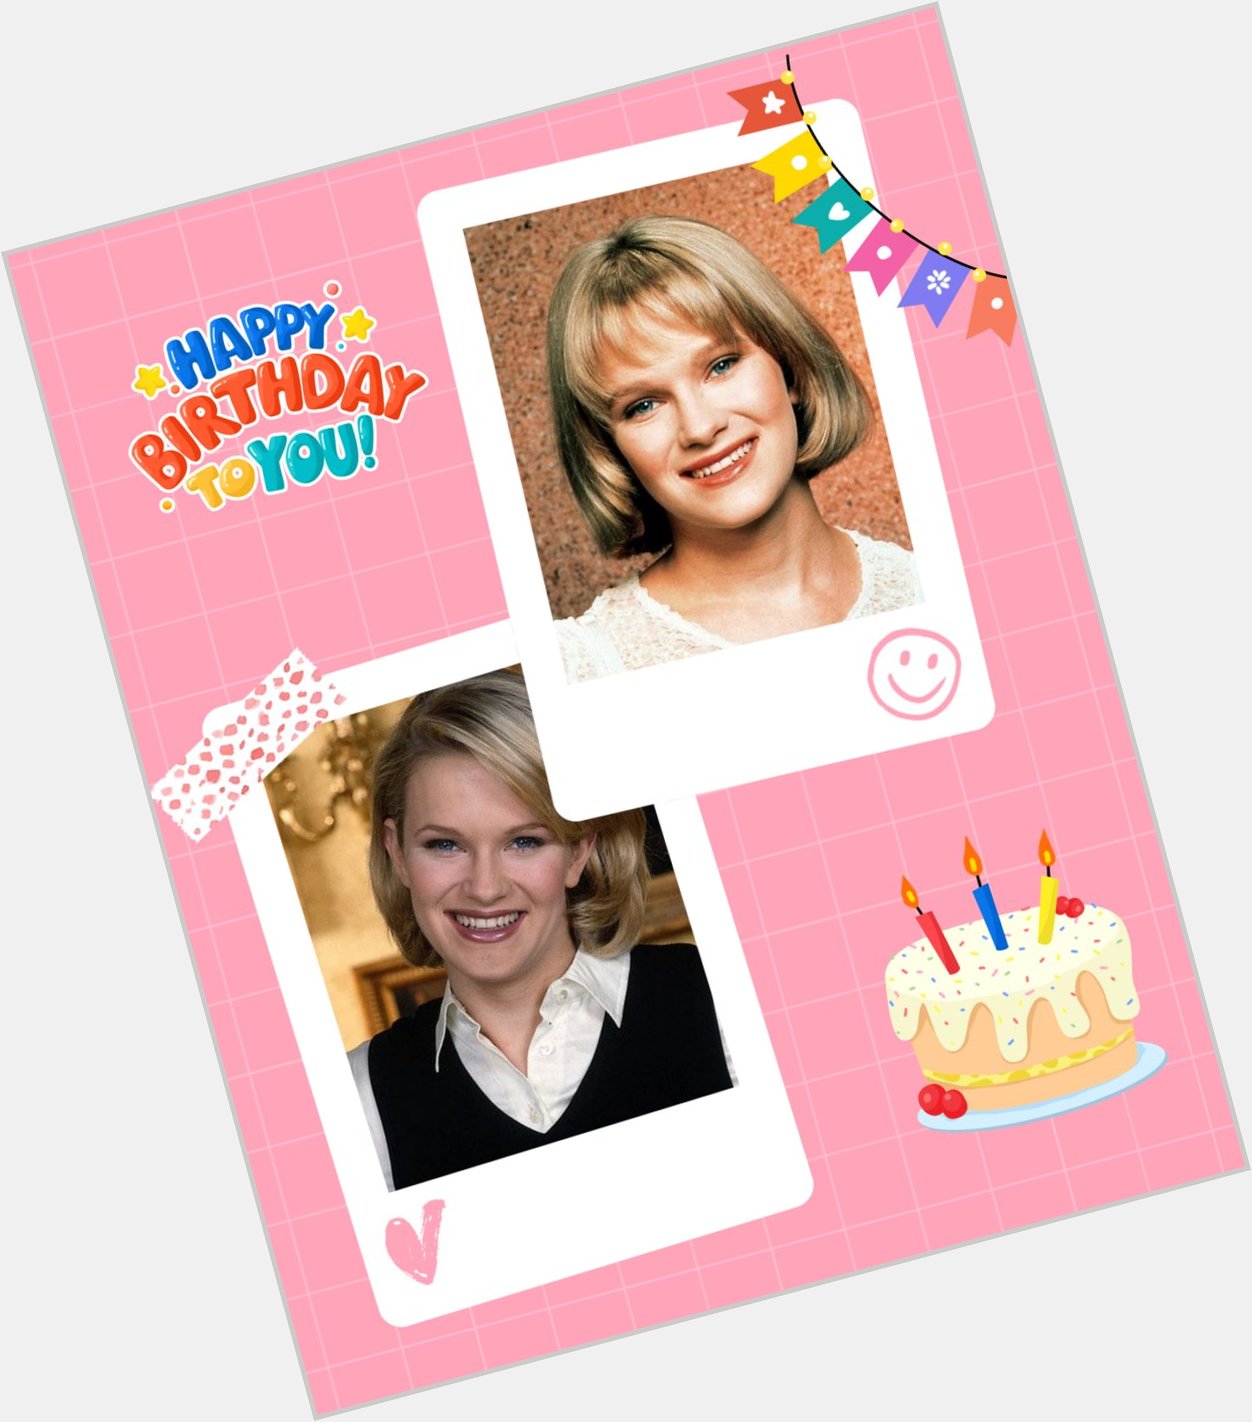 Happy Birthday Nicholle Tom! Hope you have a wonderful day       